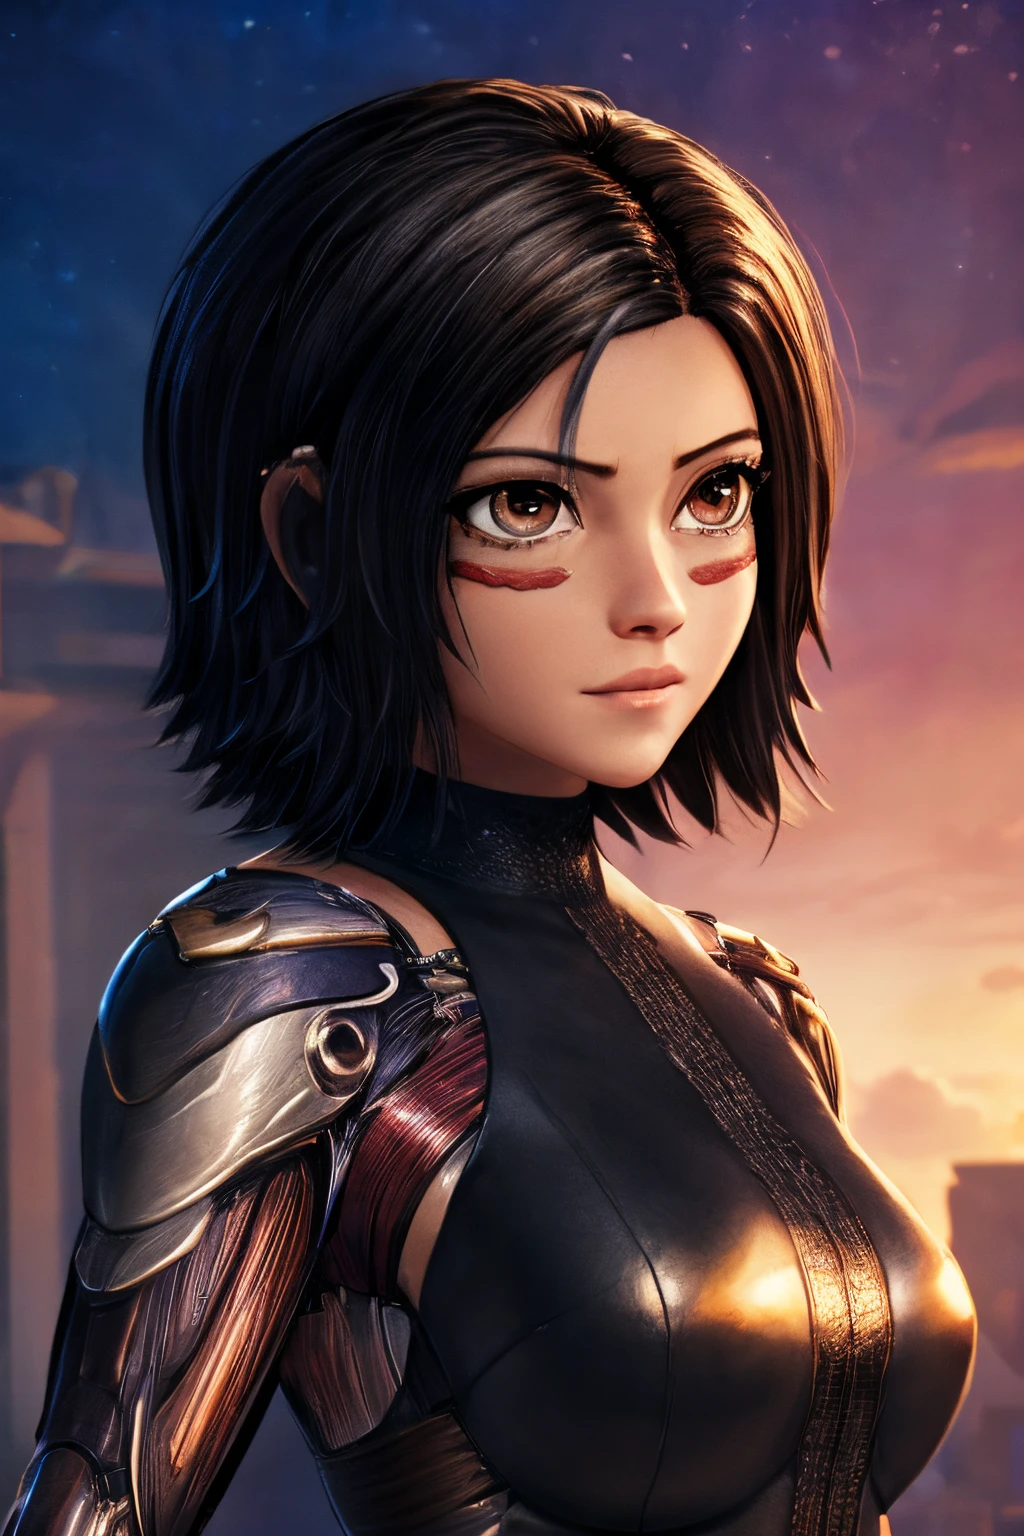 ((ultra quality)), ((tmasterpiece)), Alita Battle Angel, ((Black, Short Hair Hair)) (Beautiful cute face), (beautiful female lips), Charming, ((aroused expression)), looks at the camera with a gentle smile, eyes are slightly closed, (skin color white), Body glare, ((detailed beautiful female eyes)), ((light hazel eyes)), (juicy female lips), (beautiful female hands), ((perfect female figure)), perfect female body, Beautiful waist, gorgeous big thighs, beautiful breasts, ((Subtle and beautiful)), stands, (close-up of the face), (Alita costume) background: Cyberpunk city, Beautiful sunset, ((Depth of field)), ((high quality clear image)), (crisp details), ((higly detailed)), Realistic, Professional Photo Session, ((Clear Focus)), the anime